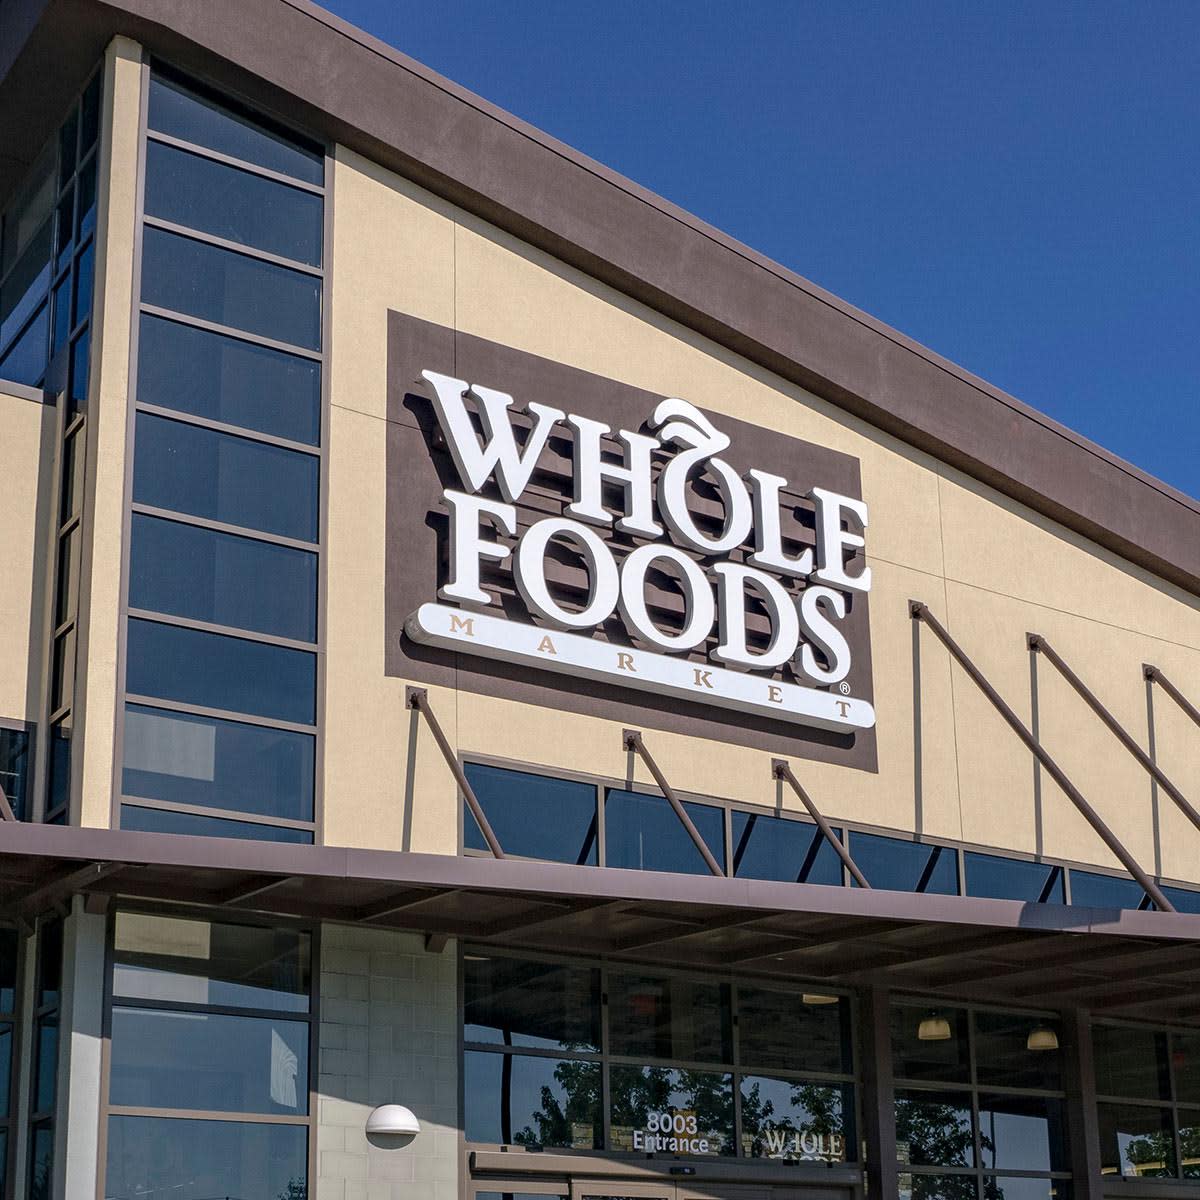 Exterior of Whole Foods Market store